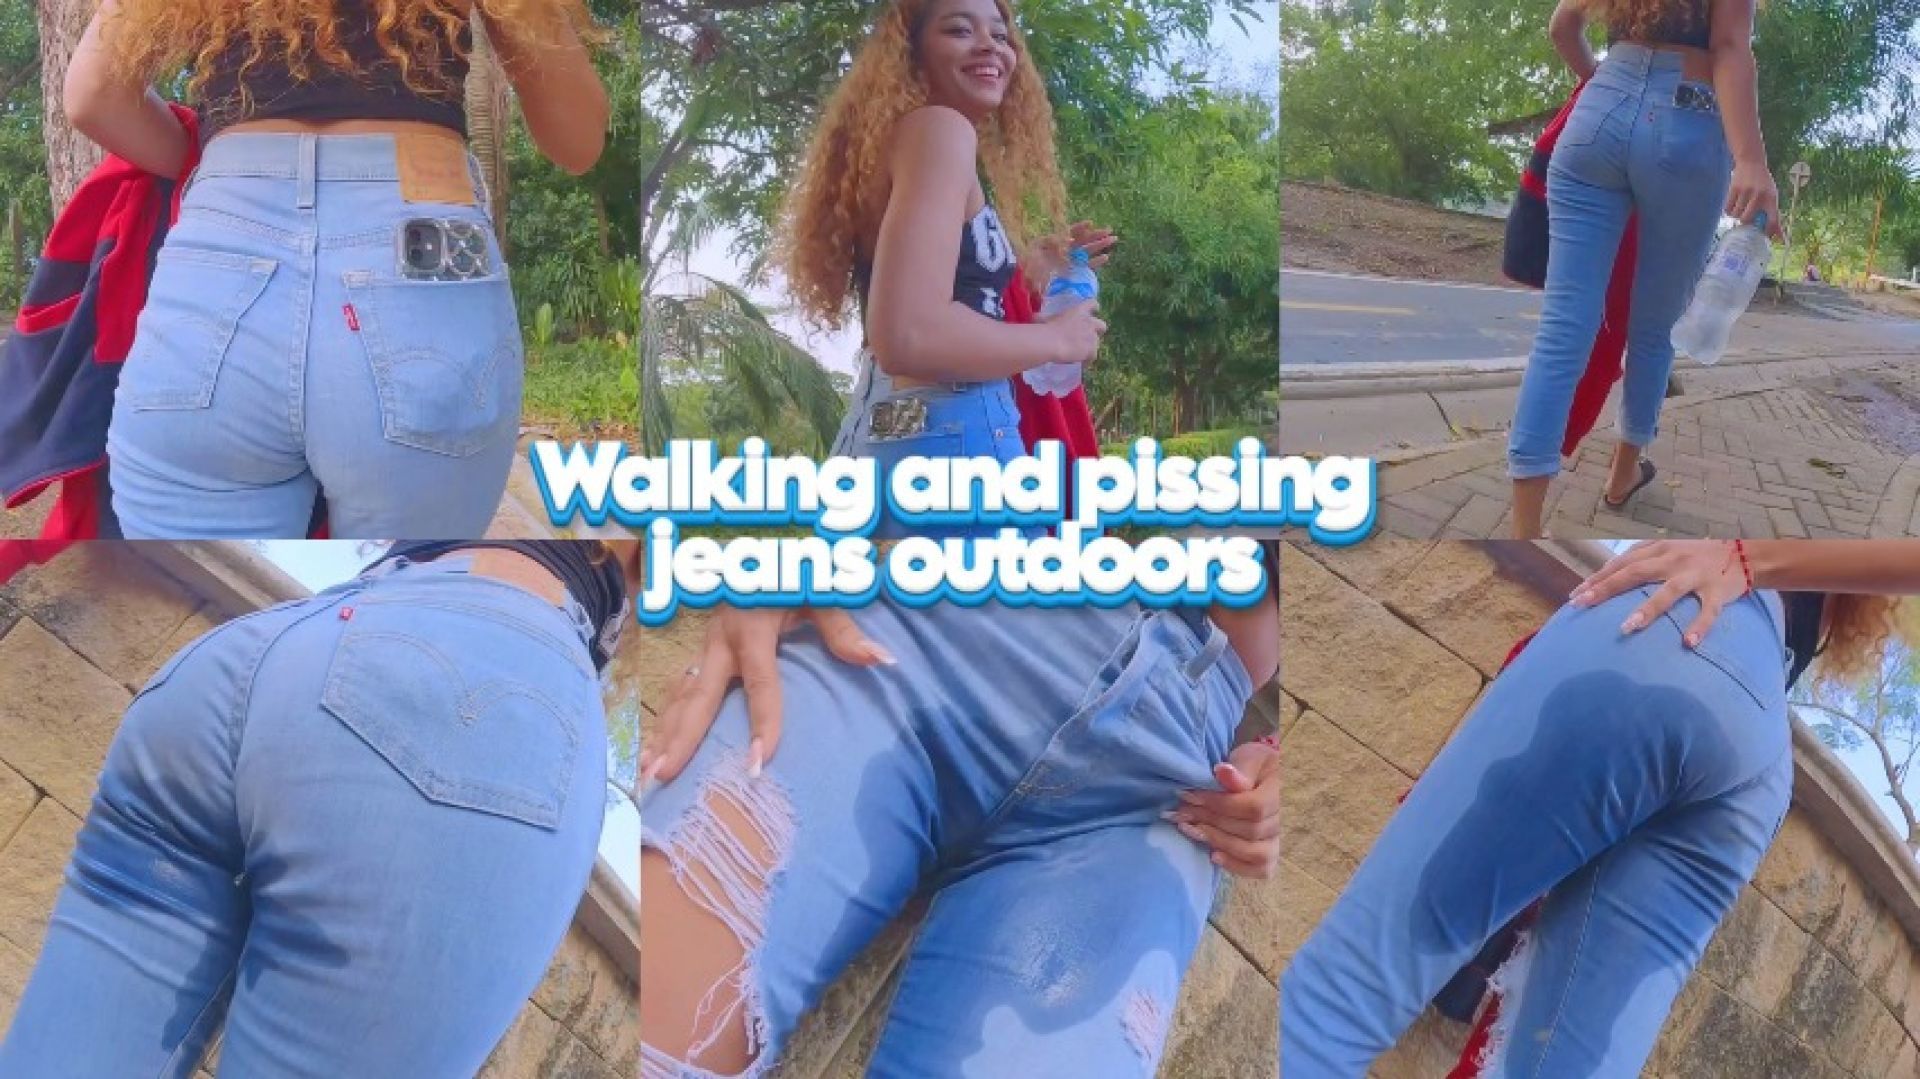 WALKING AND PISSING JEANS OUTDOORS